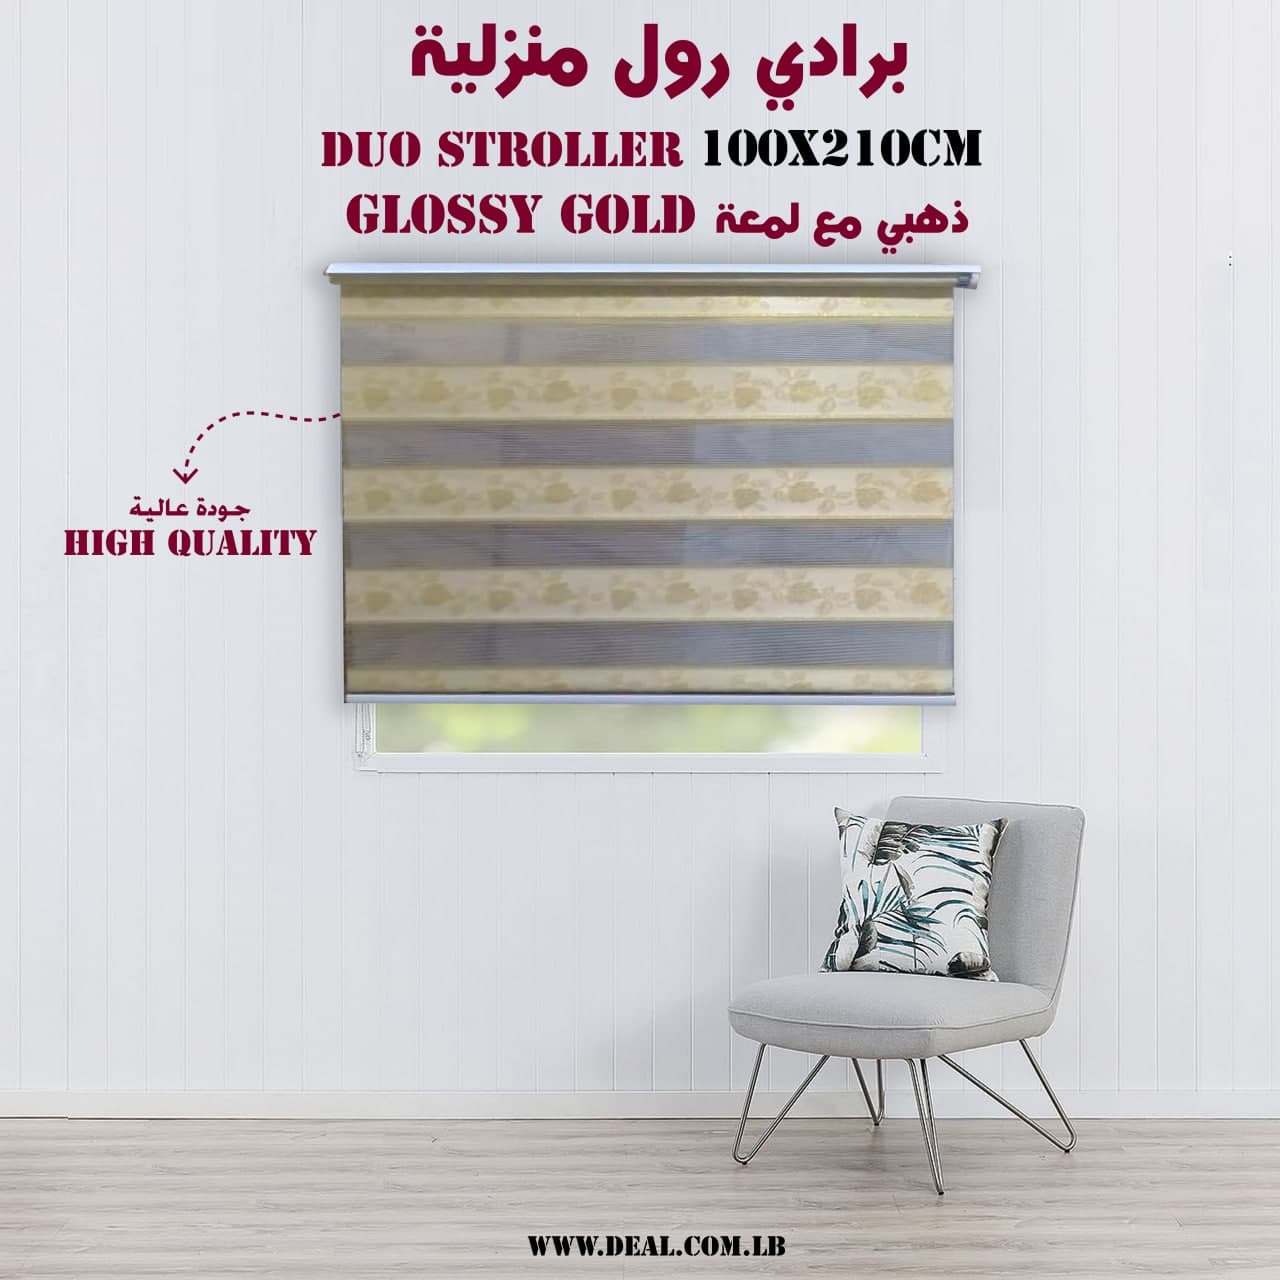 Glossy+Gold+Duo+Curtain+With+Flower+Design+100x210